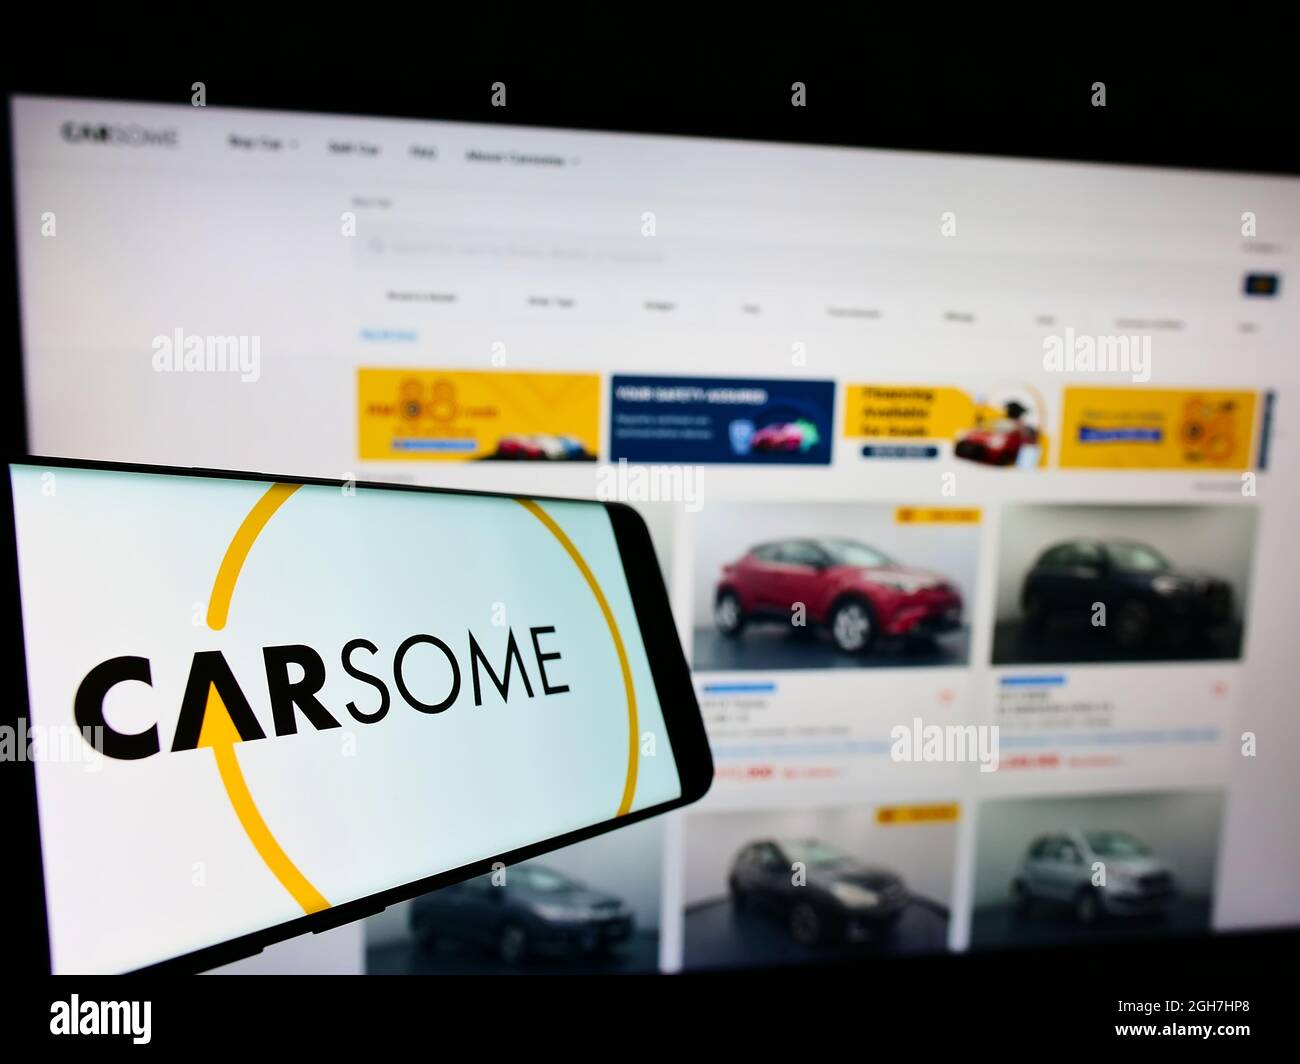 Cellphone with logo of Malaysian used car platform company Carsome Group on screen in front of business website. Focus on center of phone display. Stock Photo